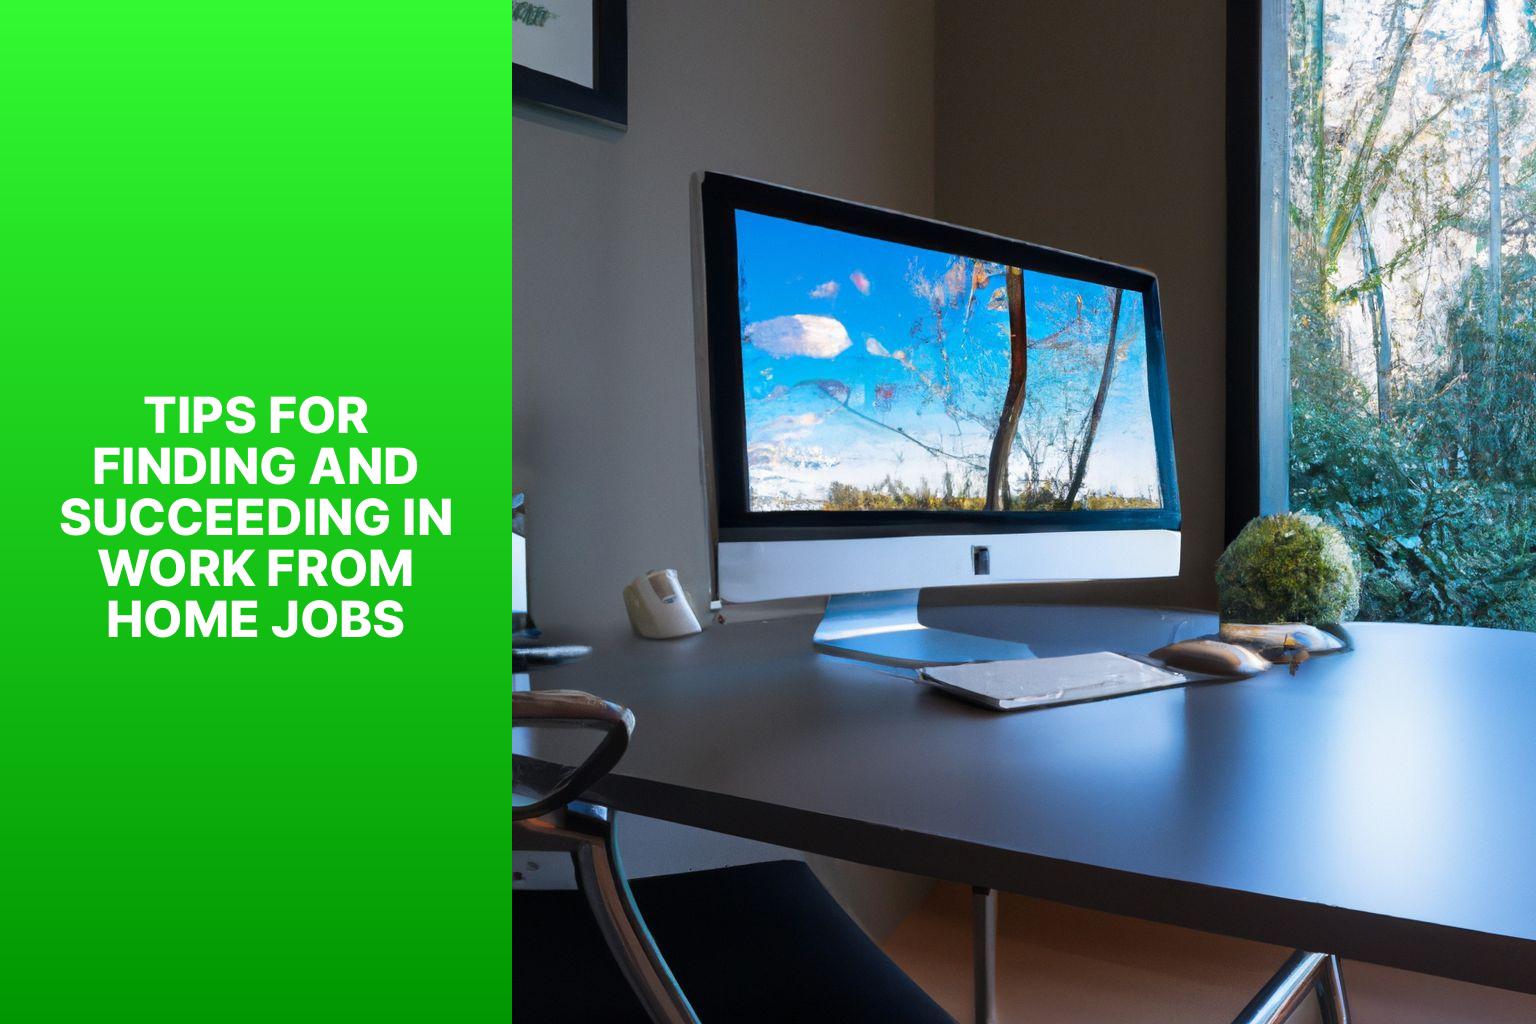 Tips for Finding and Succeeding in Work from Home Jobs - Work from home jobs with flexible hours 